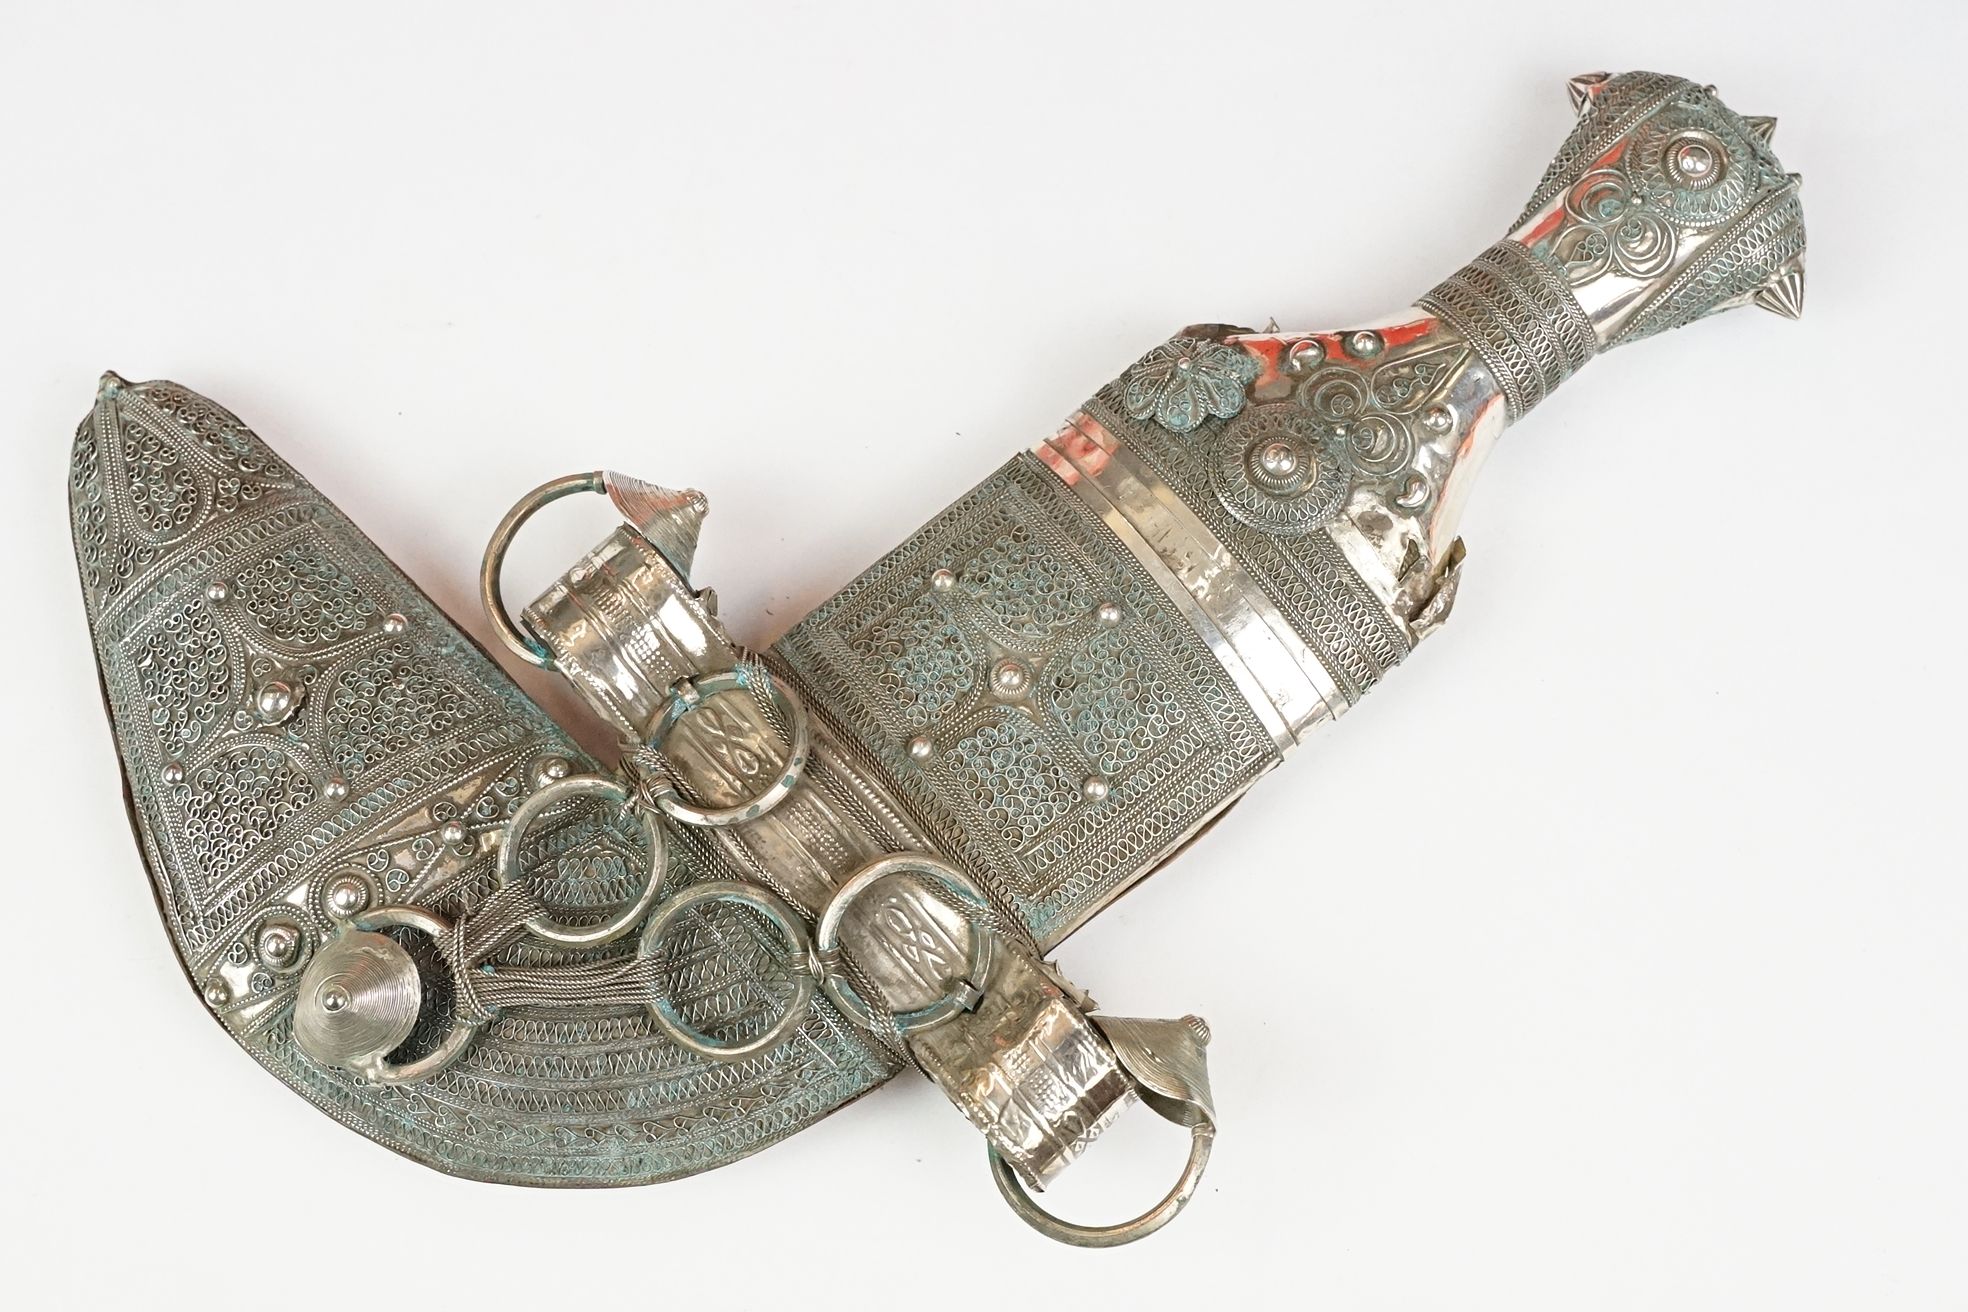 A late 19th / early 20th century Yemin silver mounted over leather sheath Jambiya. - Image 8 of 9